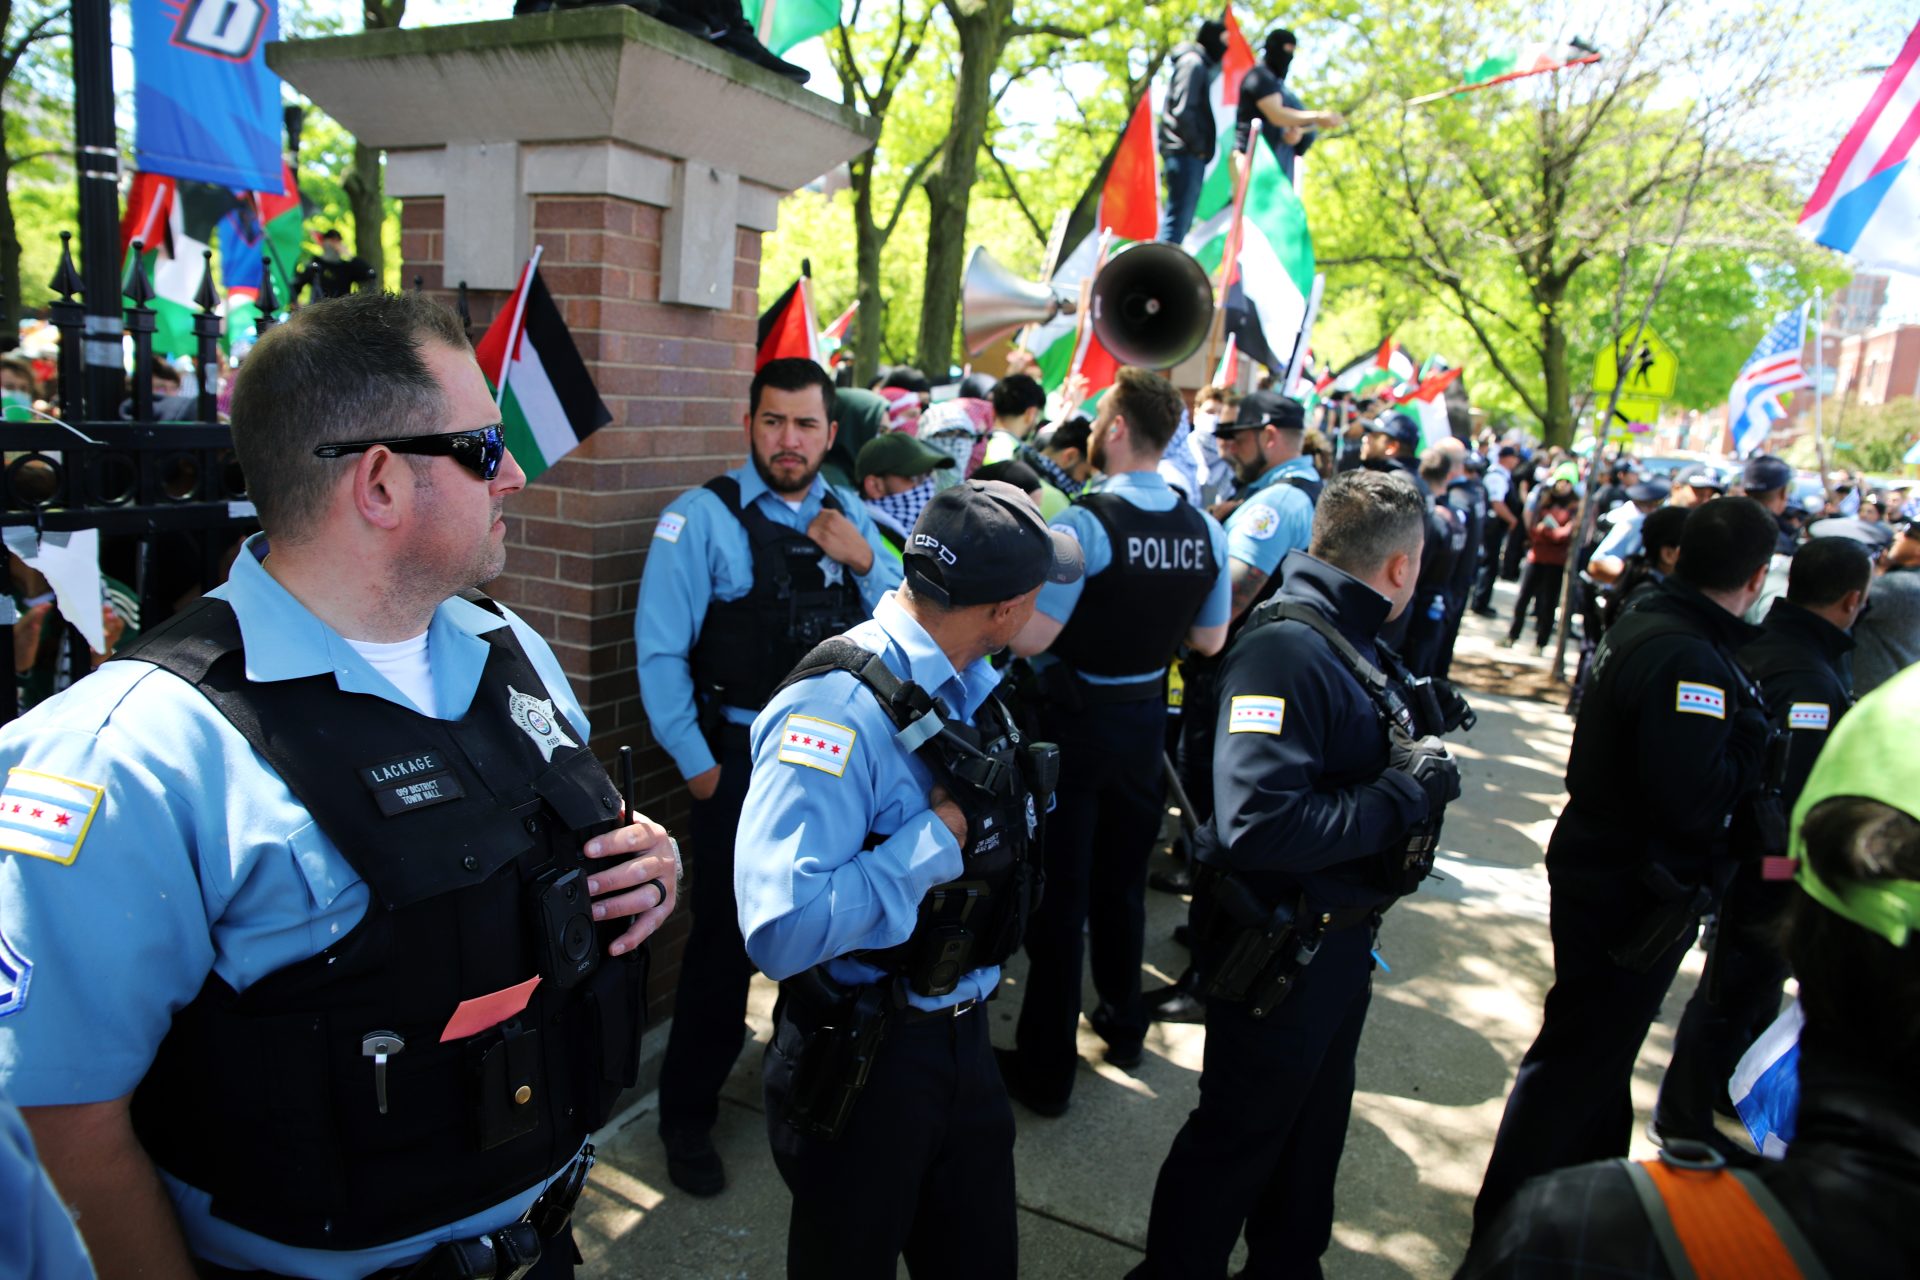 Photo+Gallery%3A+Tensions+flare%2C+CPD+present+during+counter-protest+of+DePaul%E2%80%99s+encampment